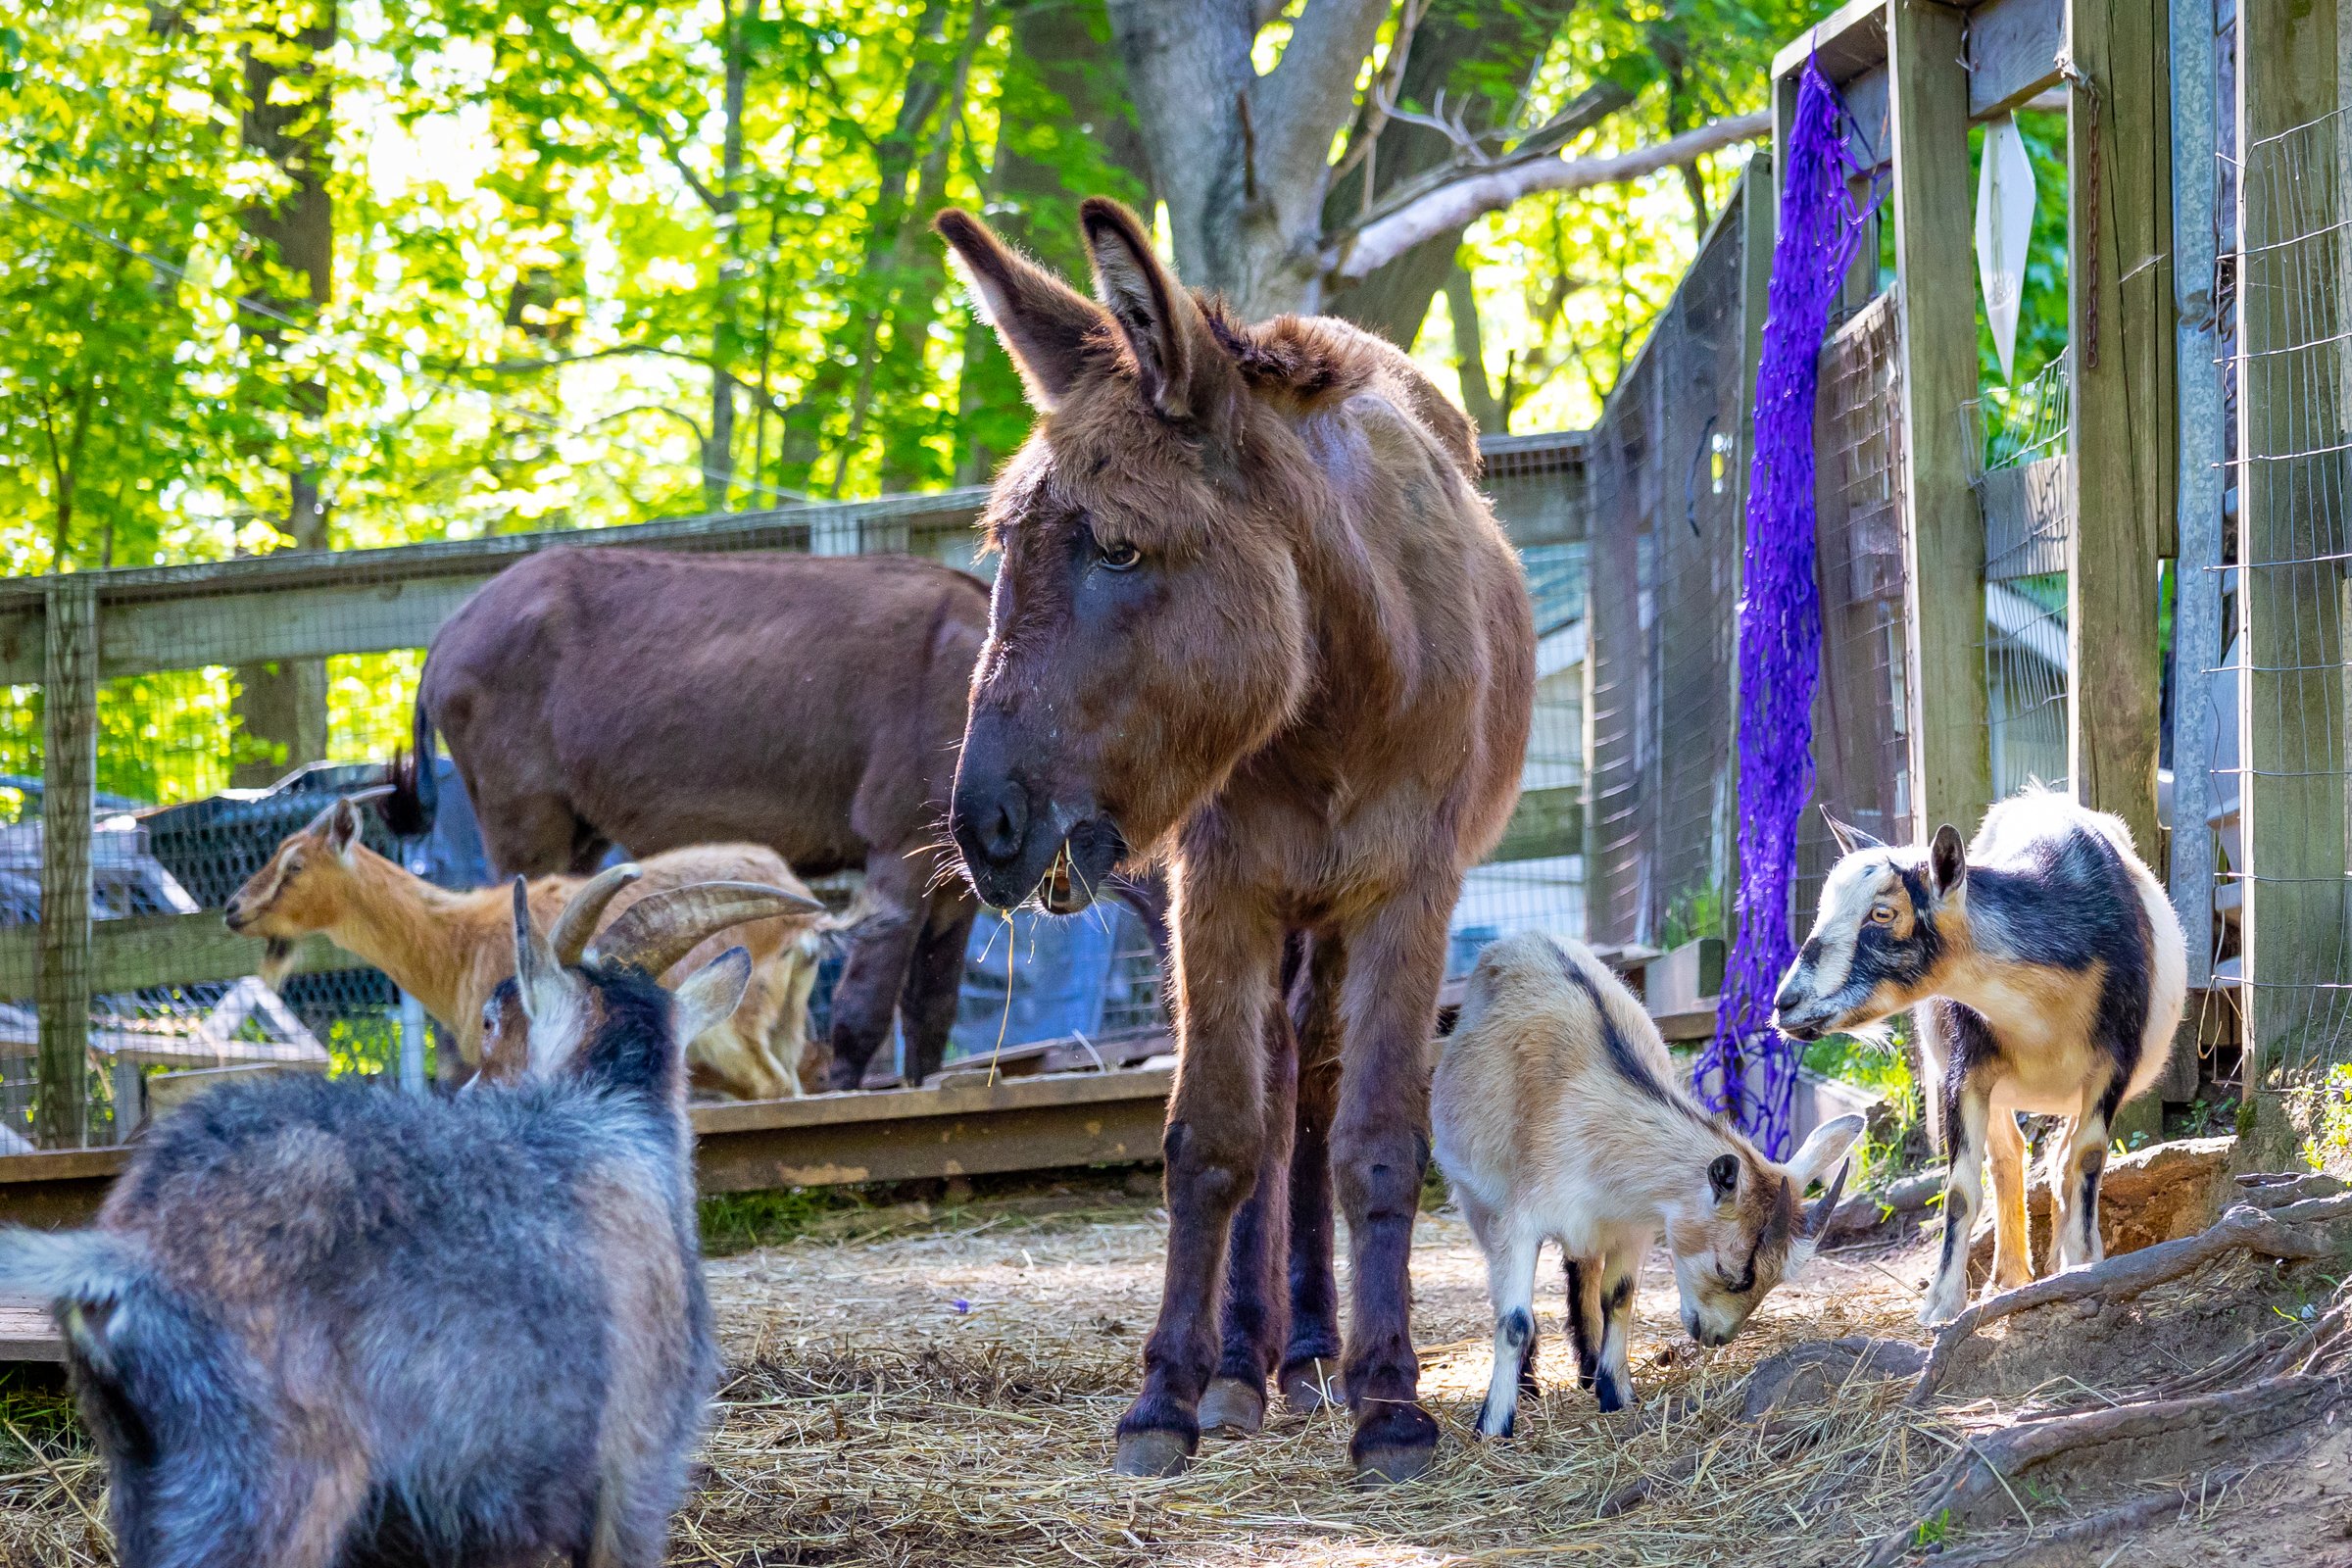 Goats and a donkey